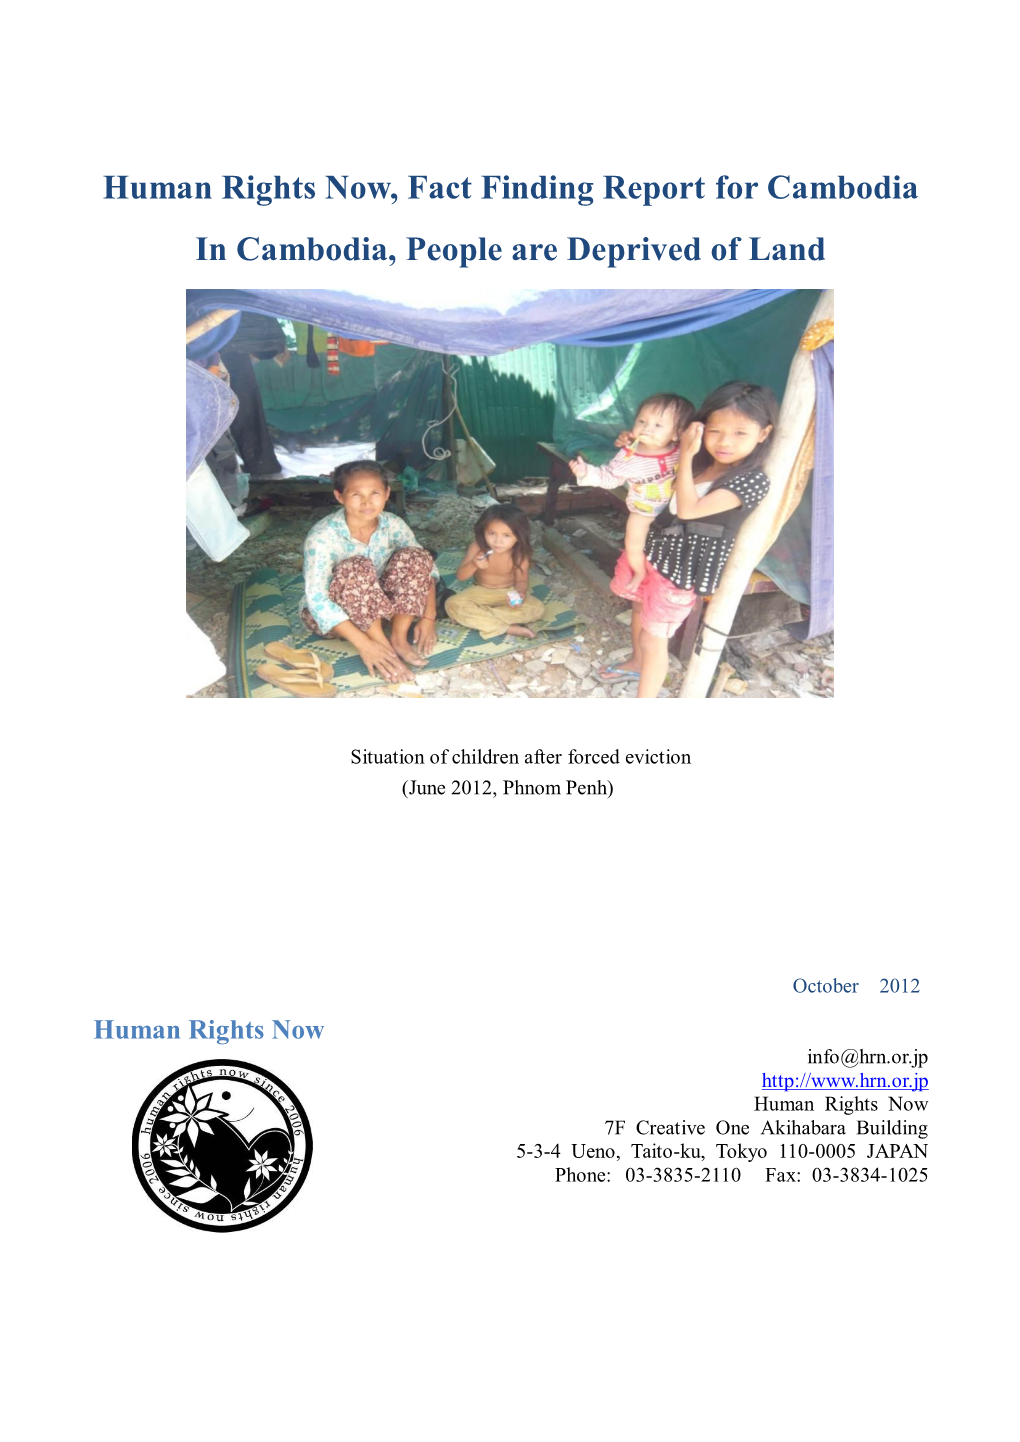 Human Rights Now, Fact Finding Report for Cambodia in Cambodia, People Are Deprived of Land